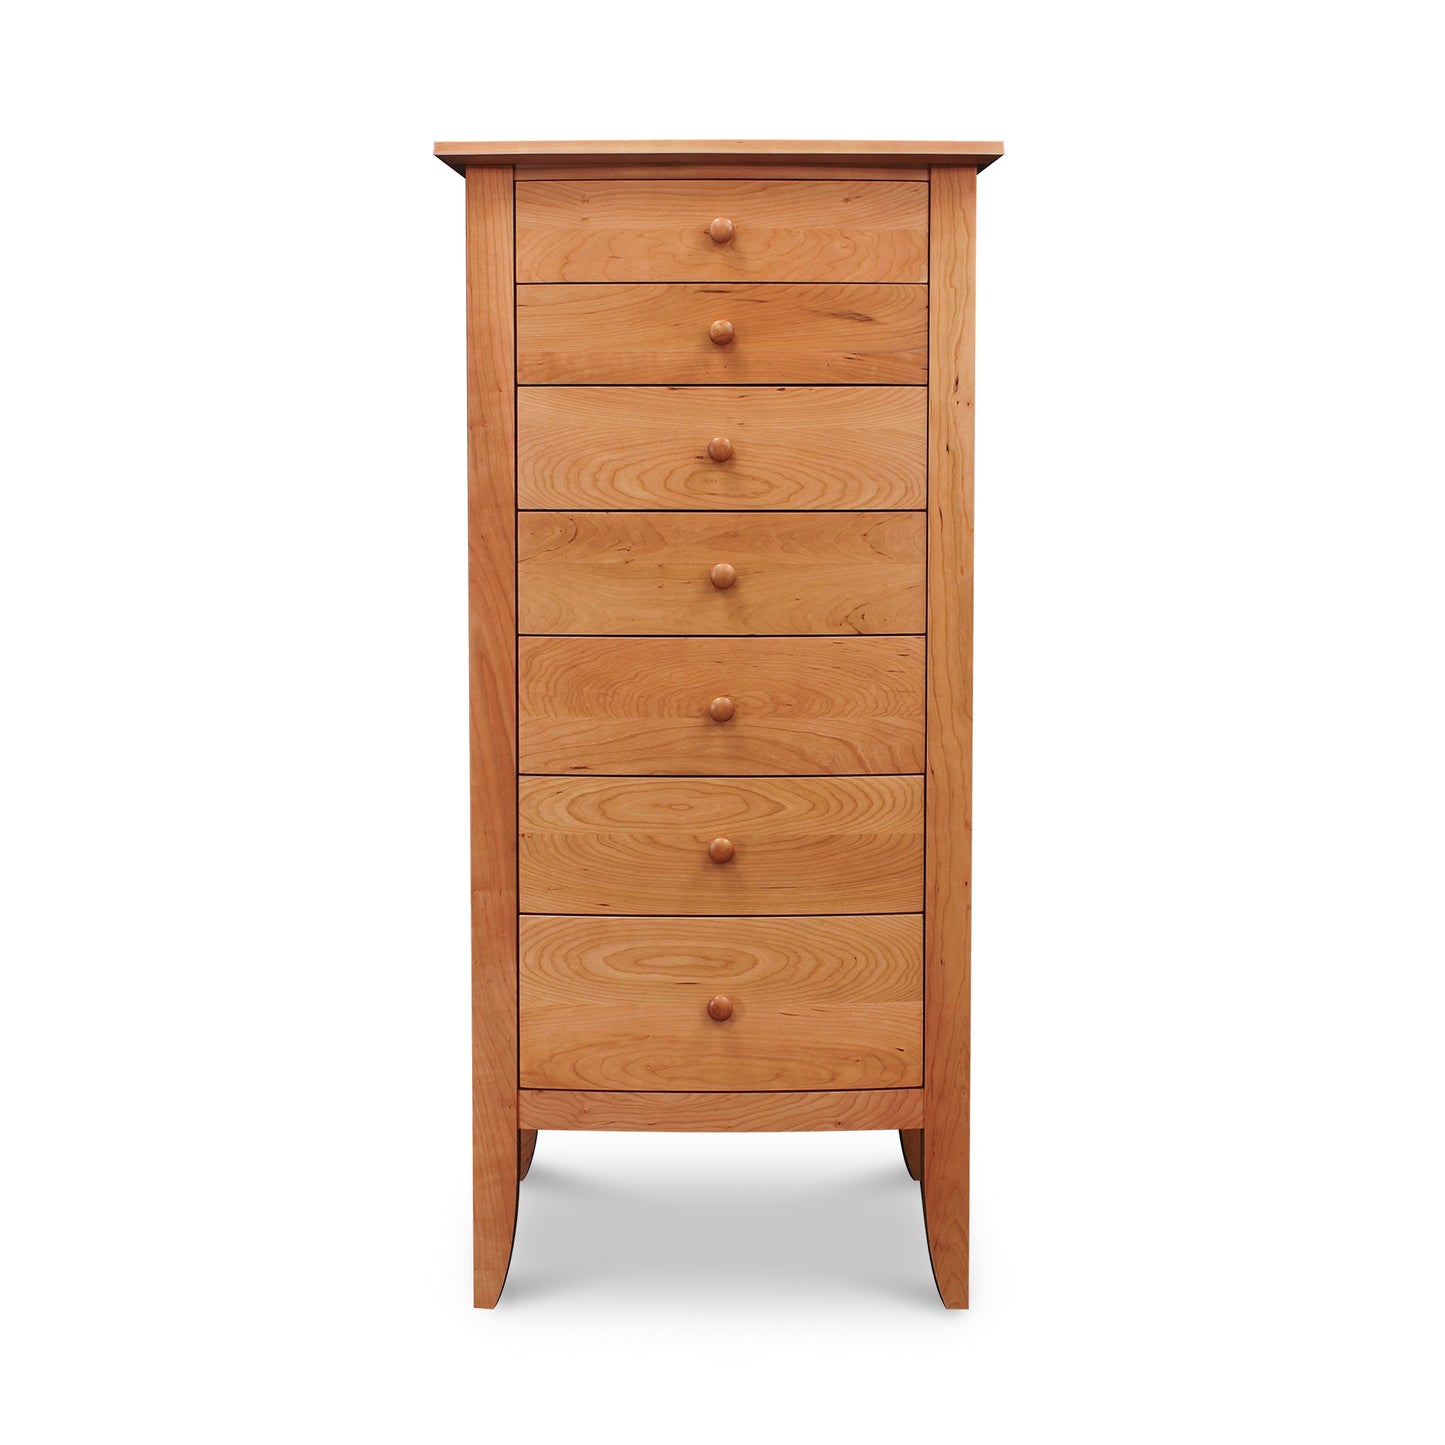 A Lyndon Furniture Bow Front 7-Drawer Lingerie Chest with a 7-drawer configuration on a white background.